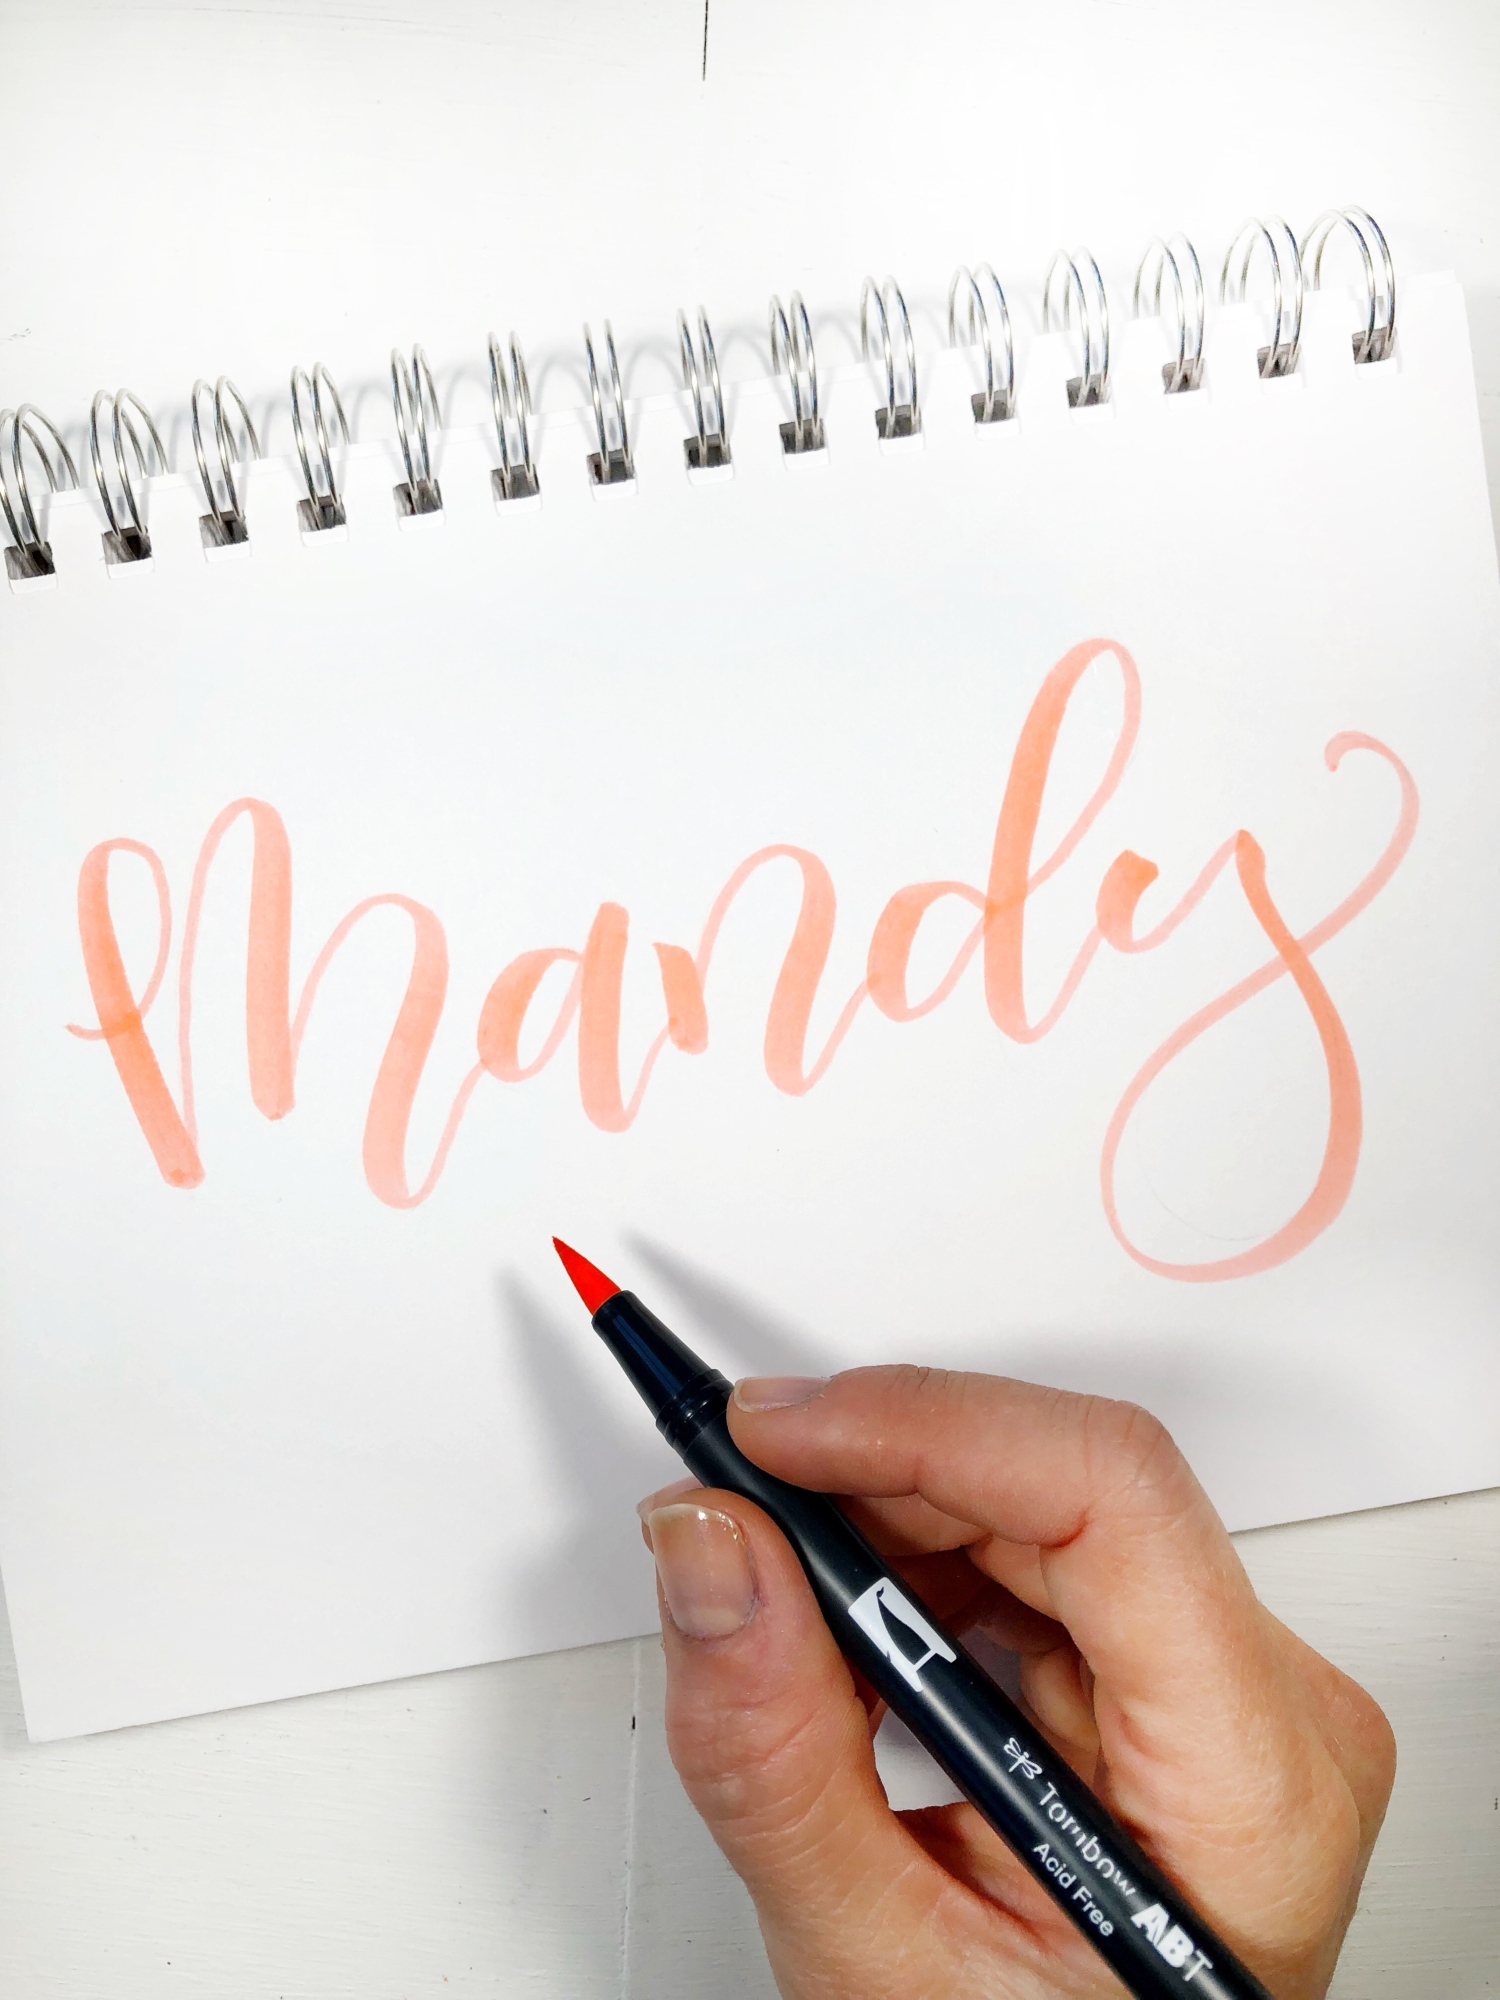 Lettering with the Tombow Beginners Lettering Set - Tombow USA Blog